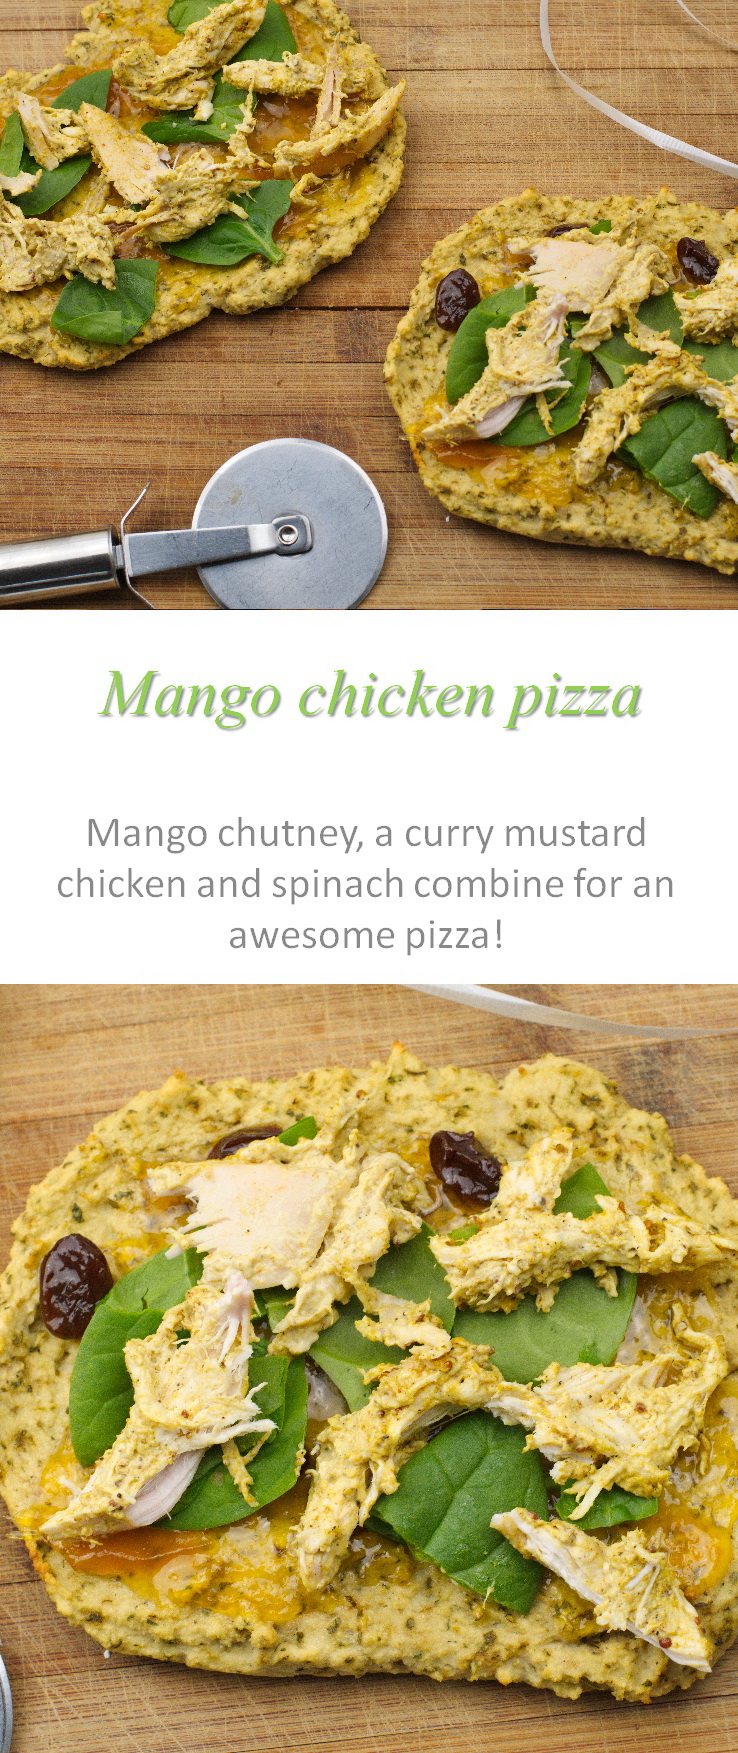 A simple and tasty recipe for mango chicken pizza - testing the boundaries of pizza toppings. #pizza